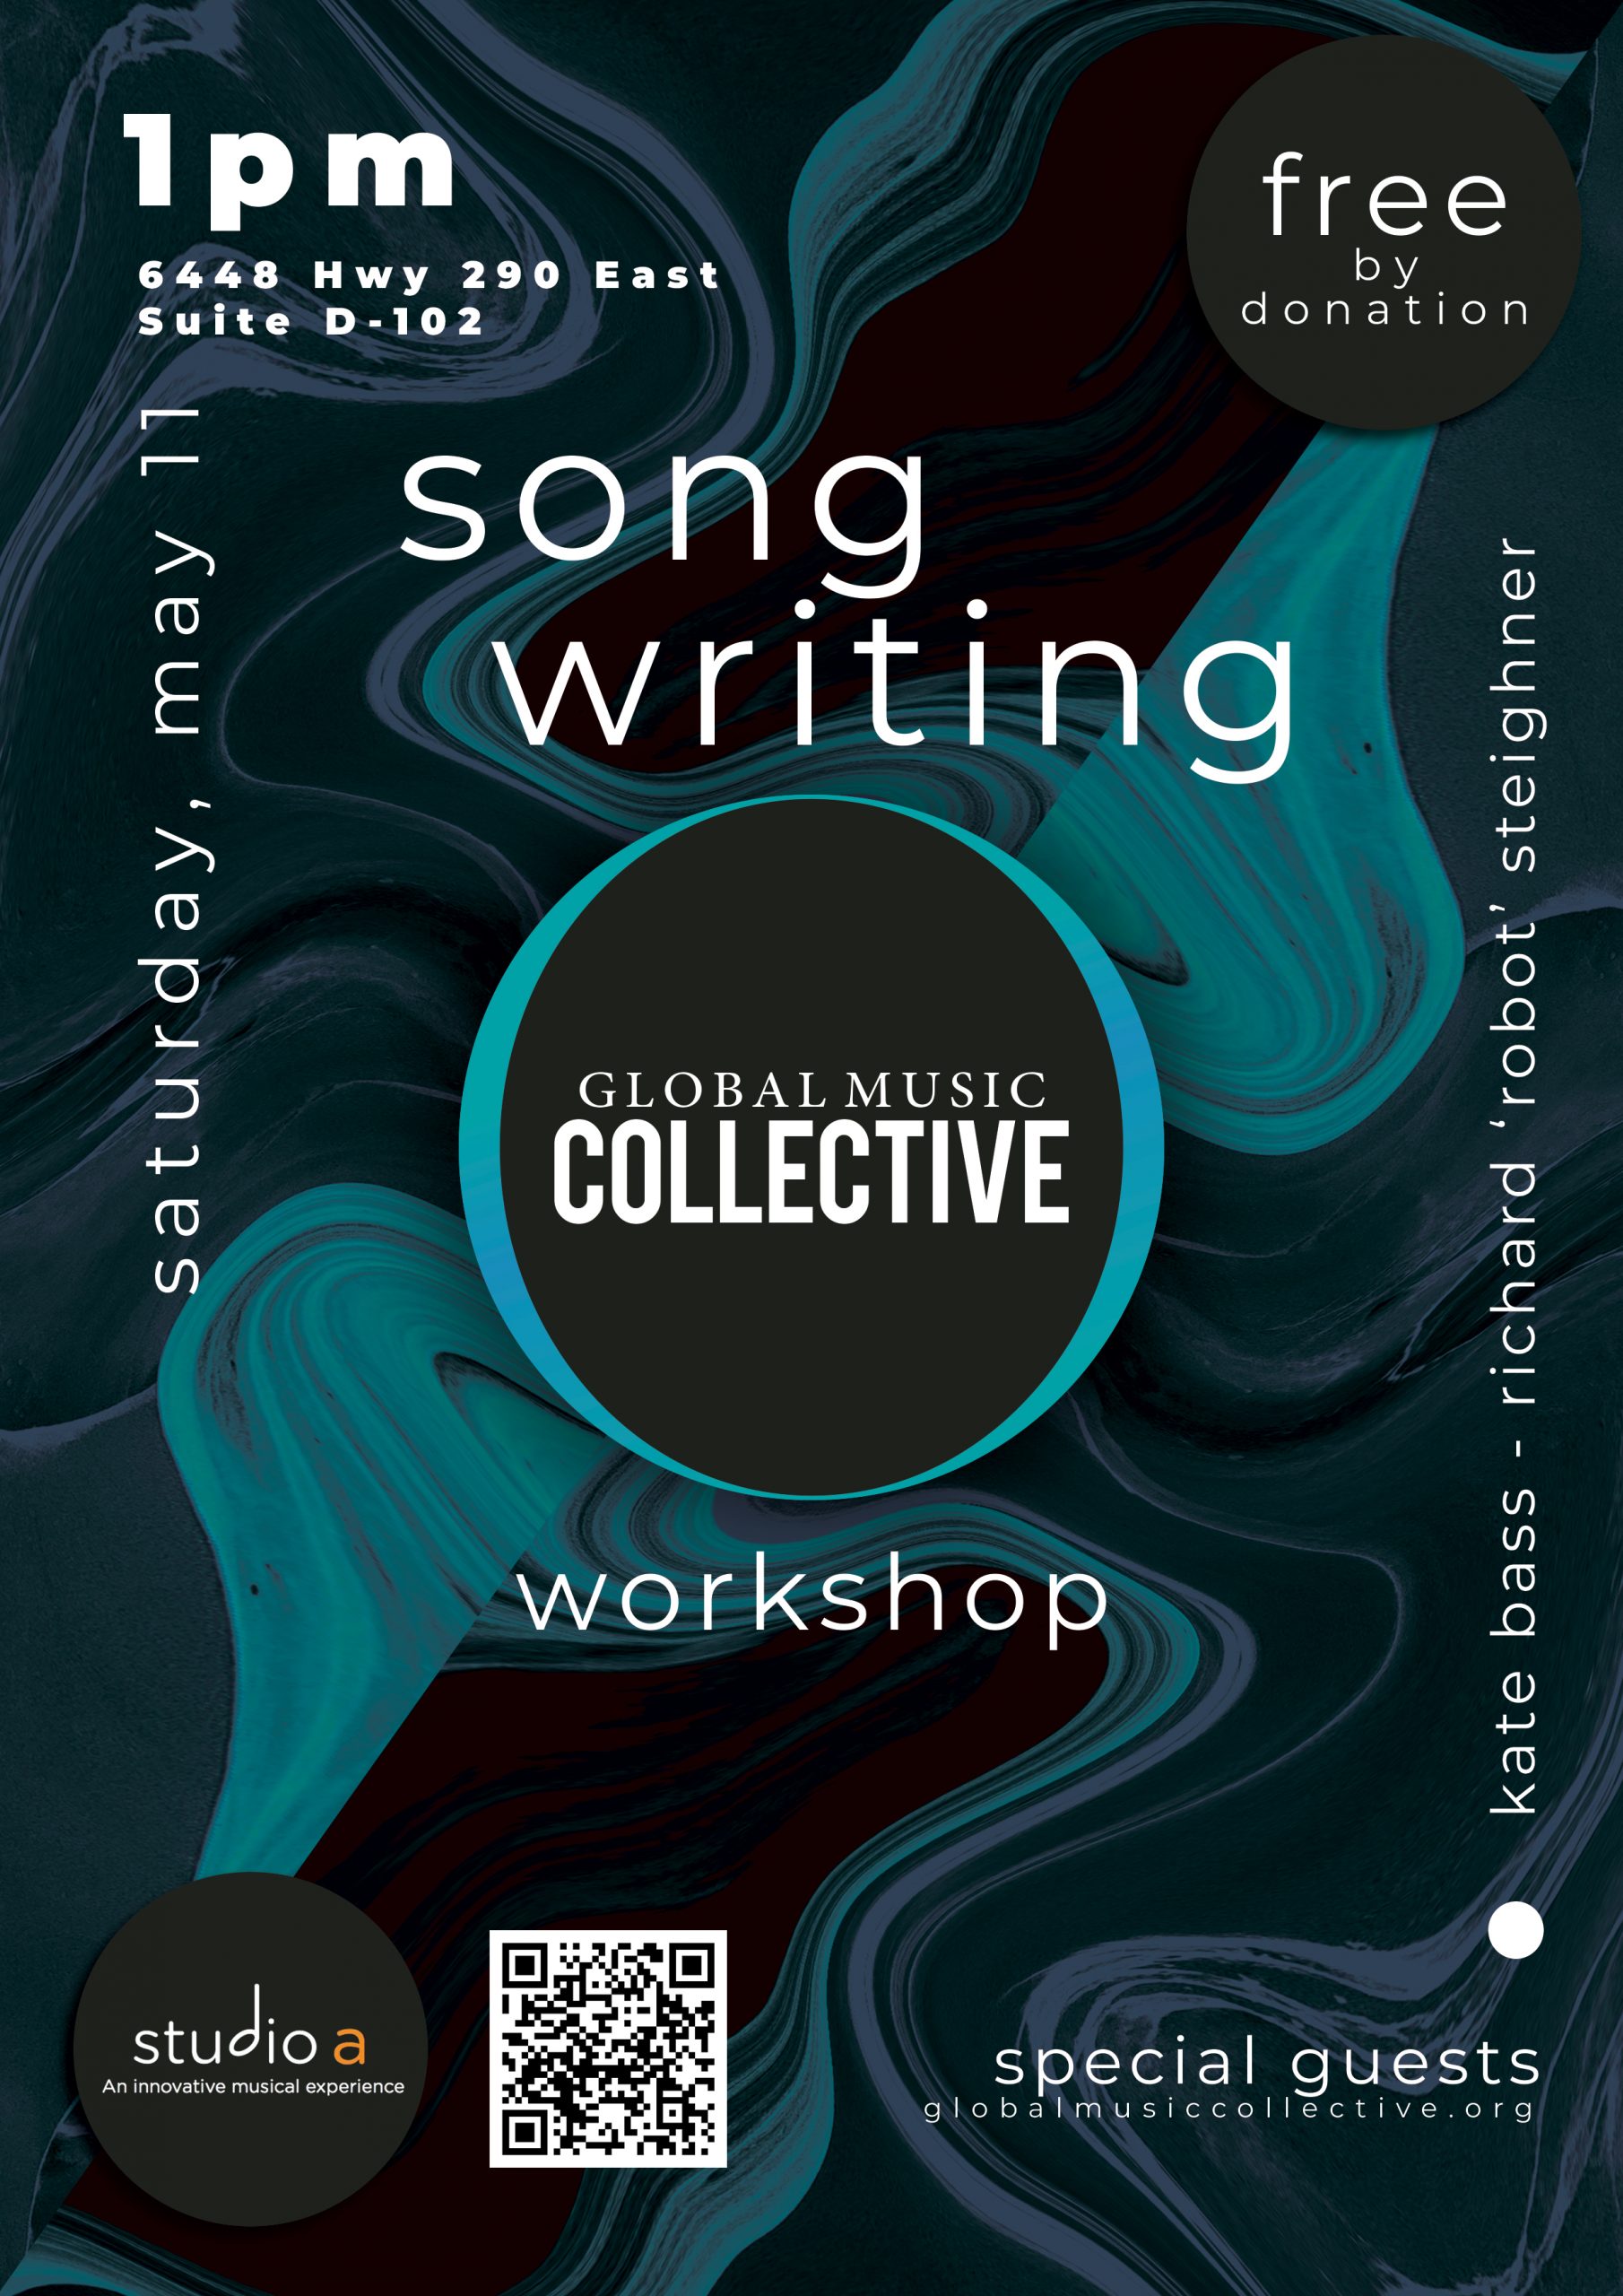 Songwriting Workshop at Studio A (Austin)